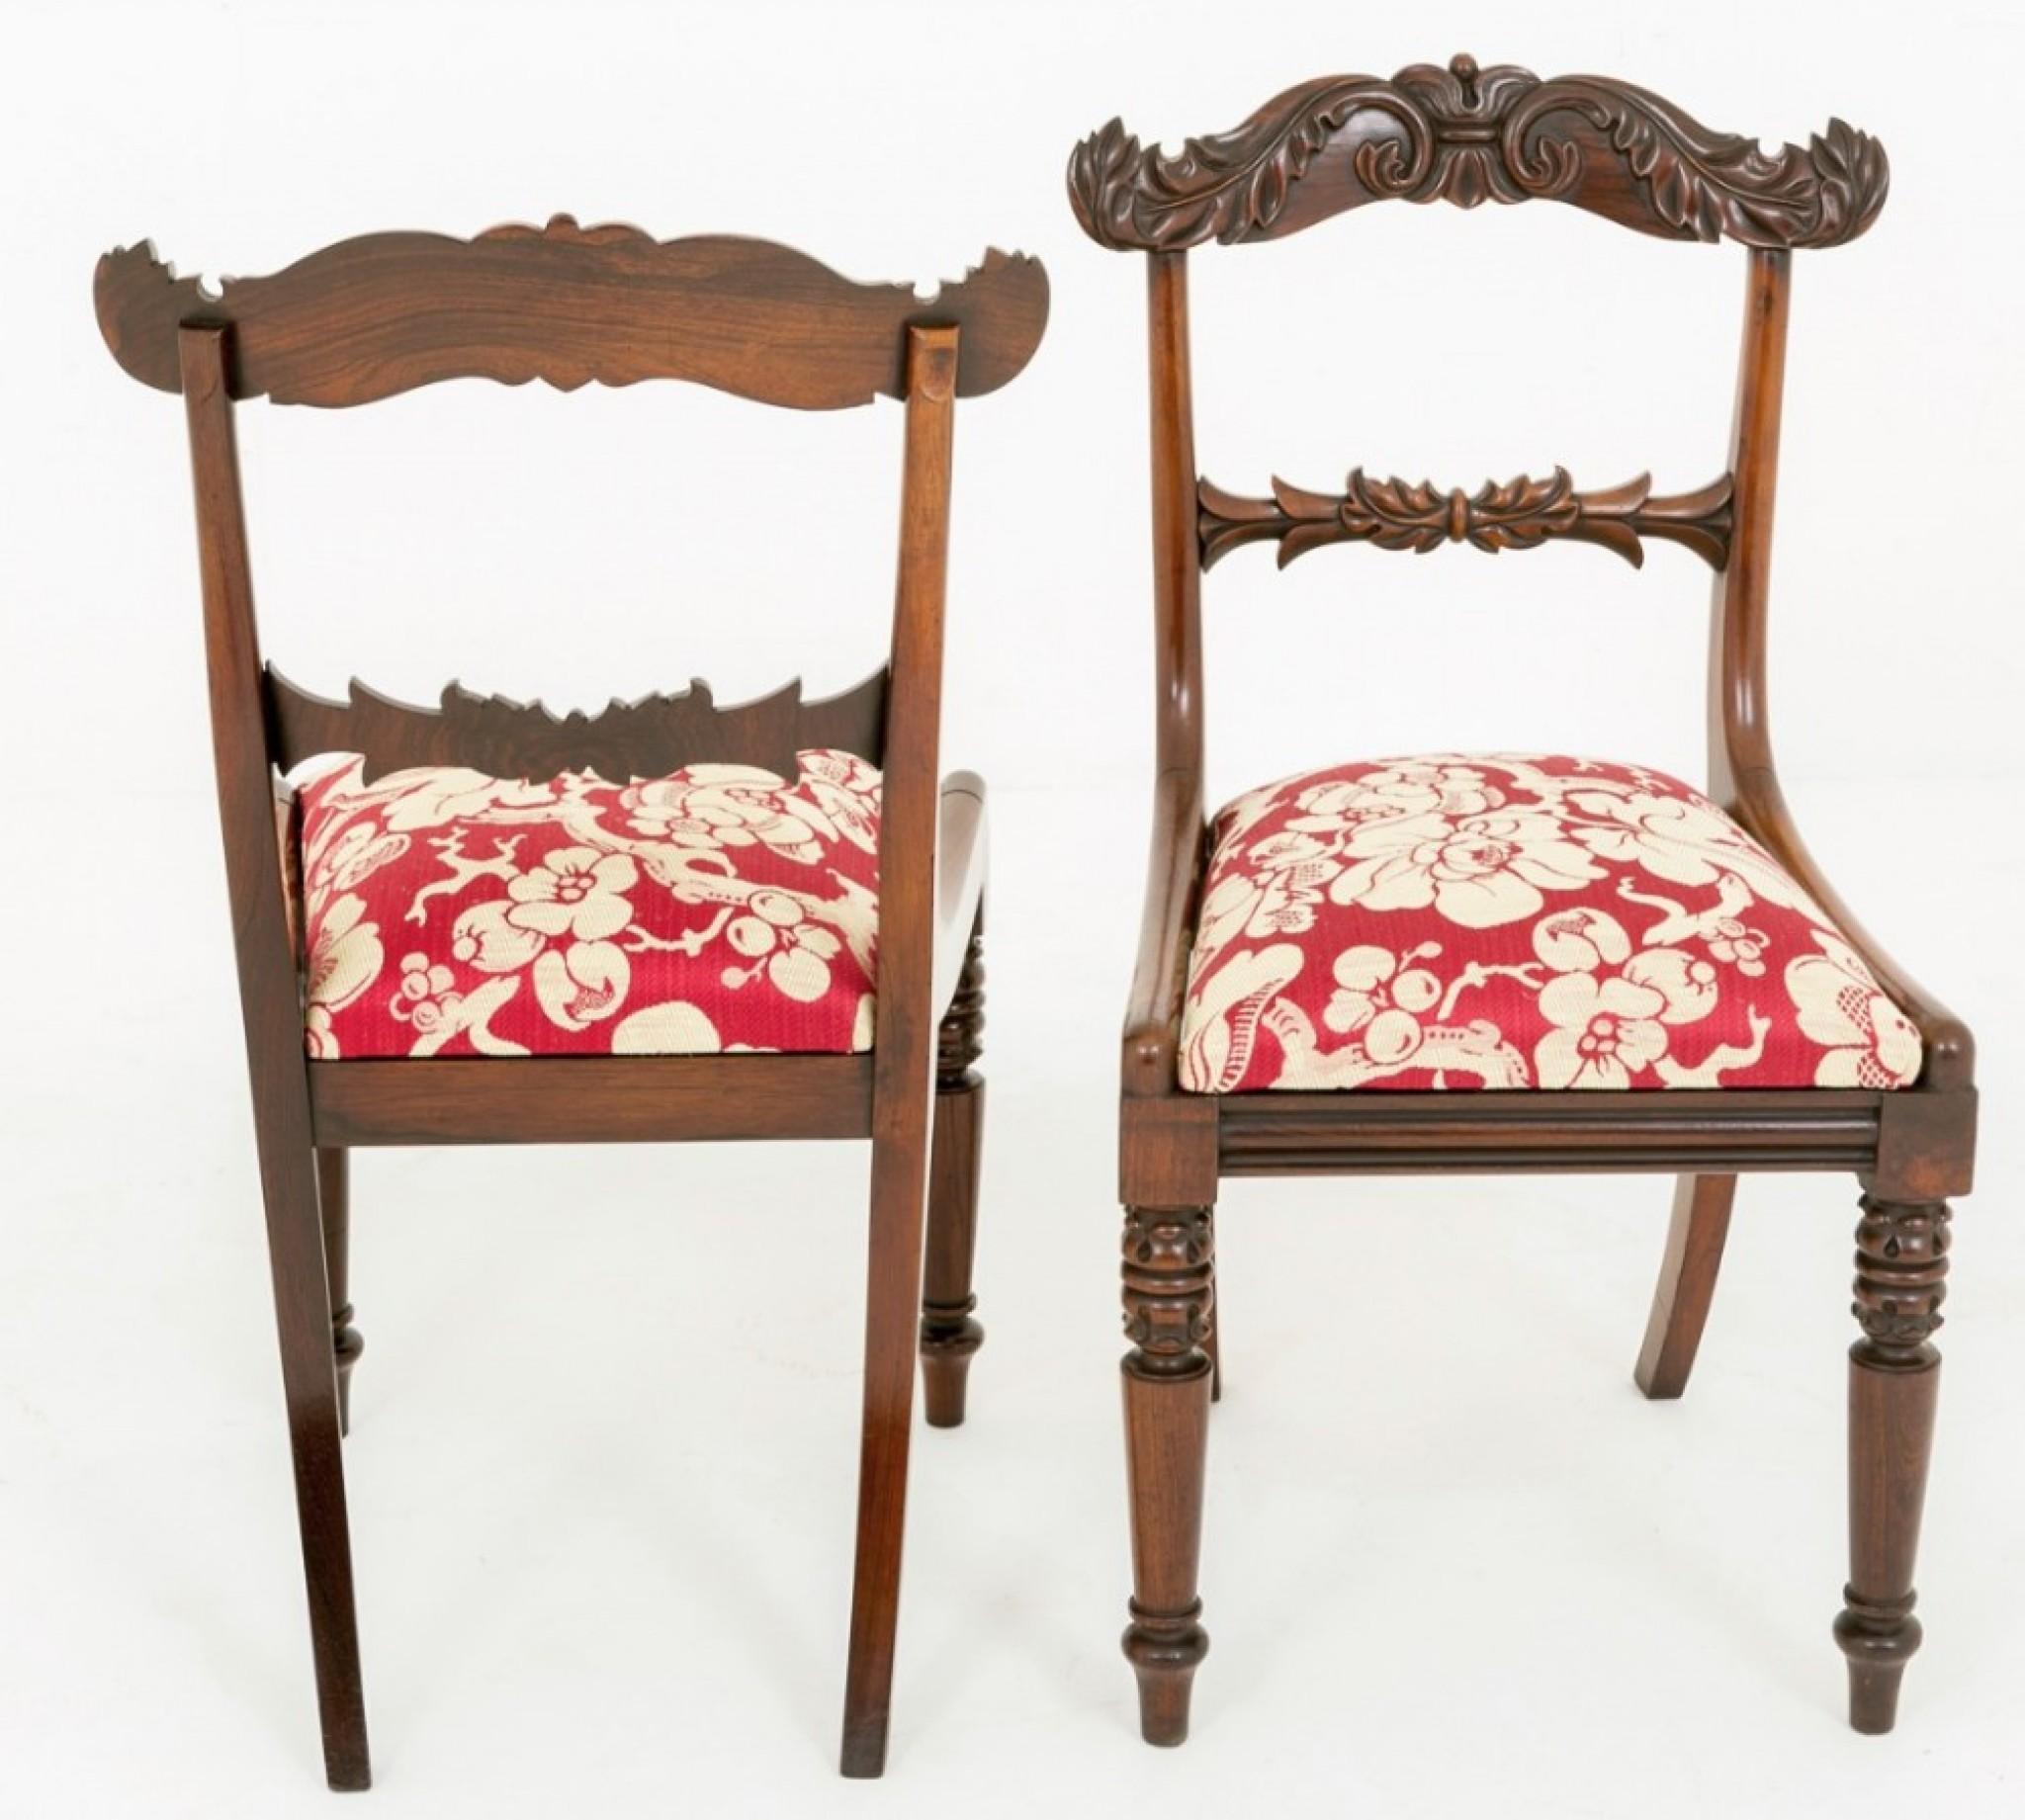 Stunning Pair of Regency Rosewood Chairs.
These chairs having ring turned and carved front legs.
The centre rail of typical Regency design and the wonderful top rail featuring deep carved leaves etc.
The lift out seats having been recently re